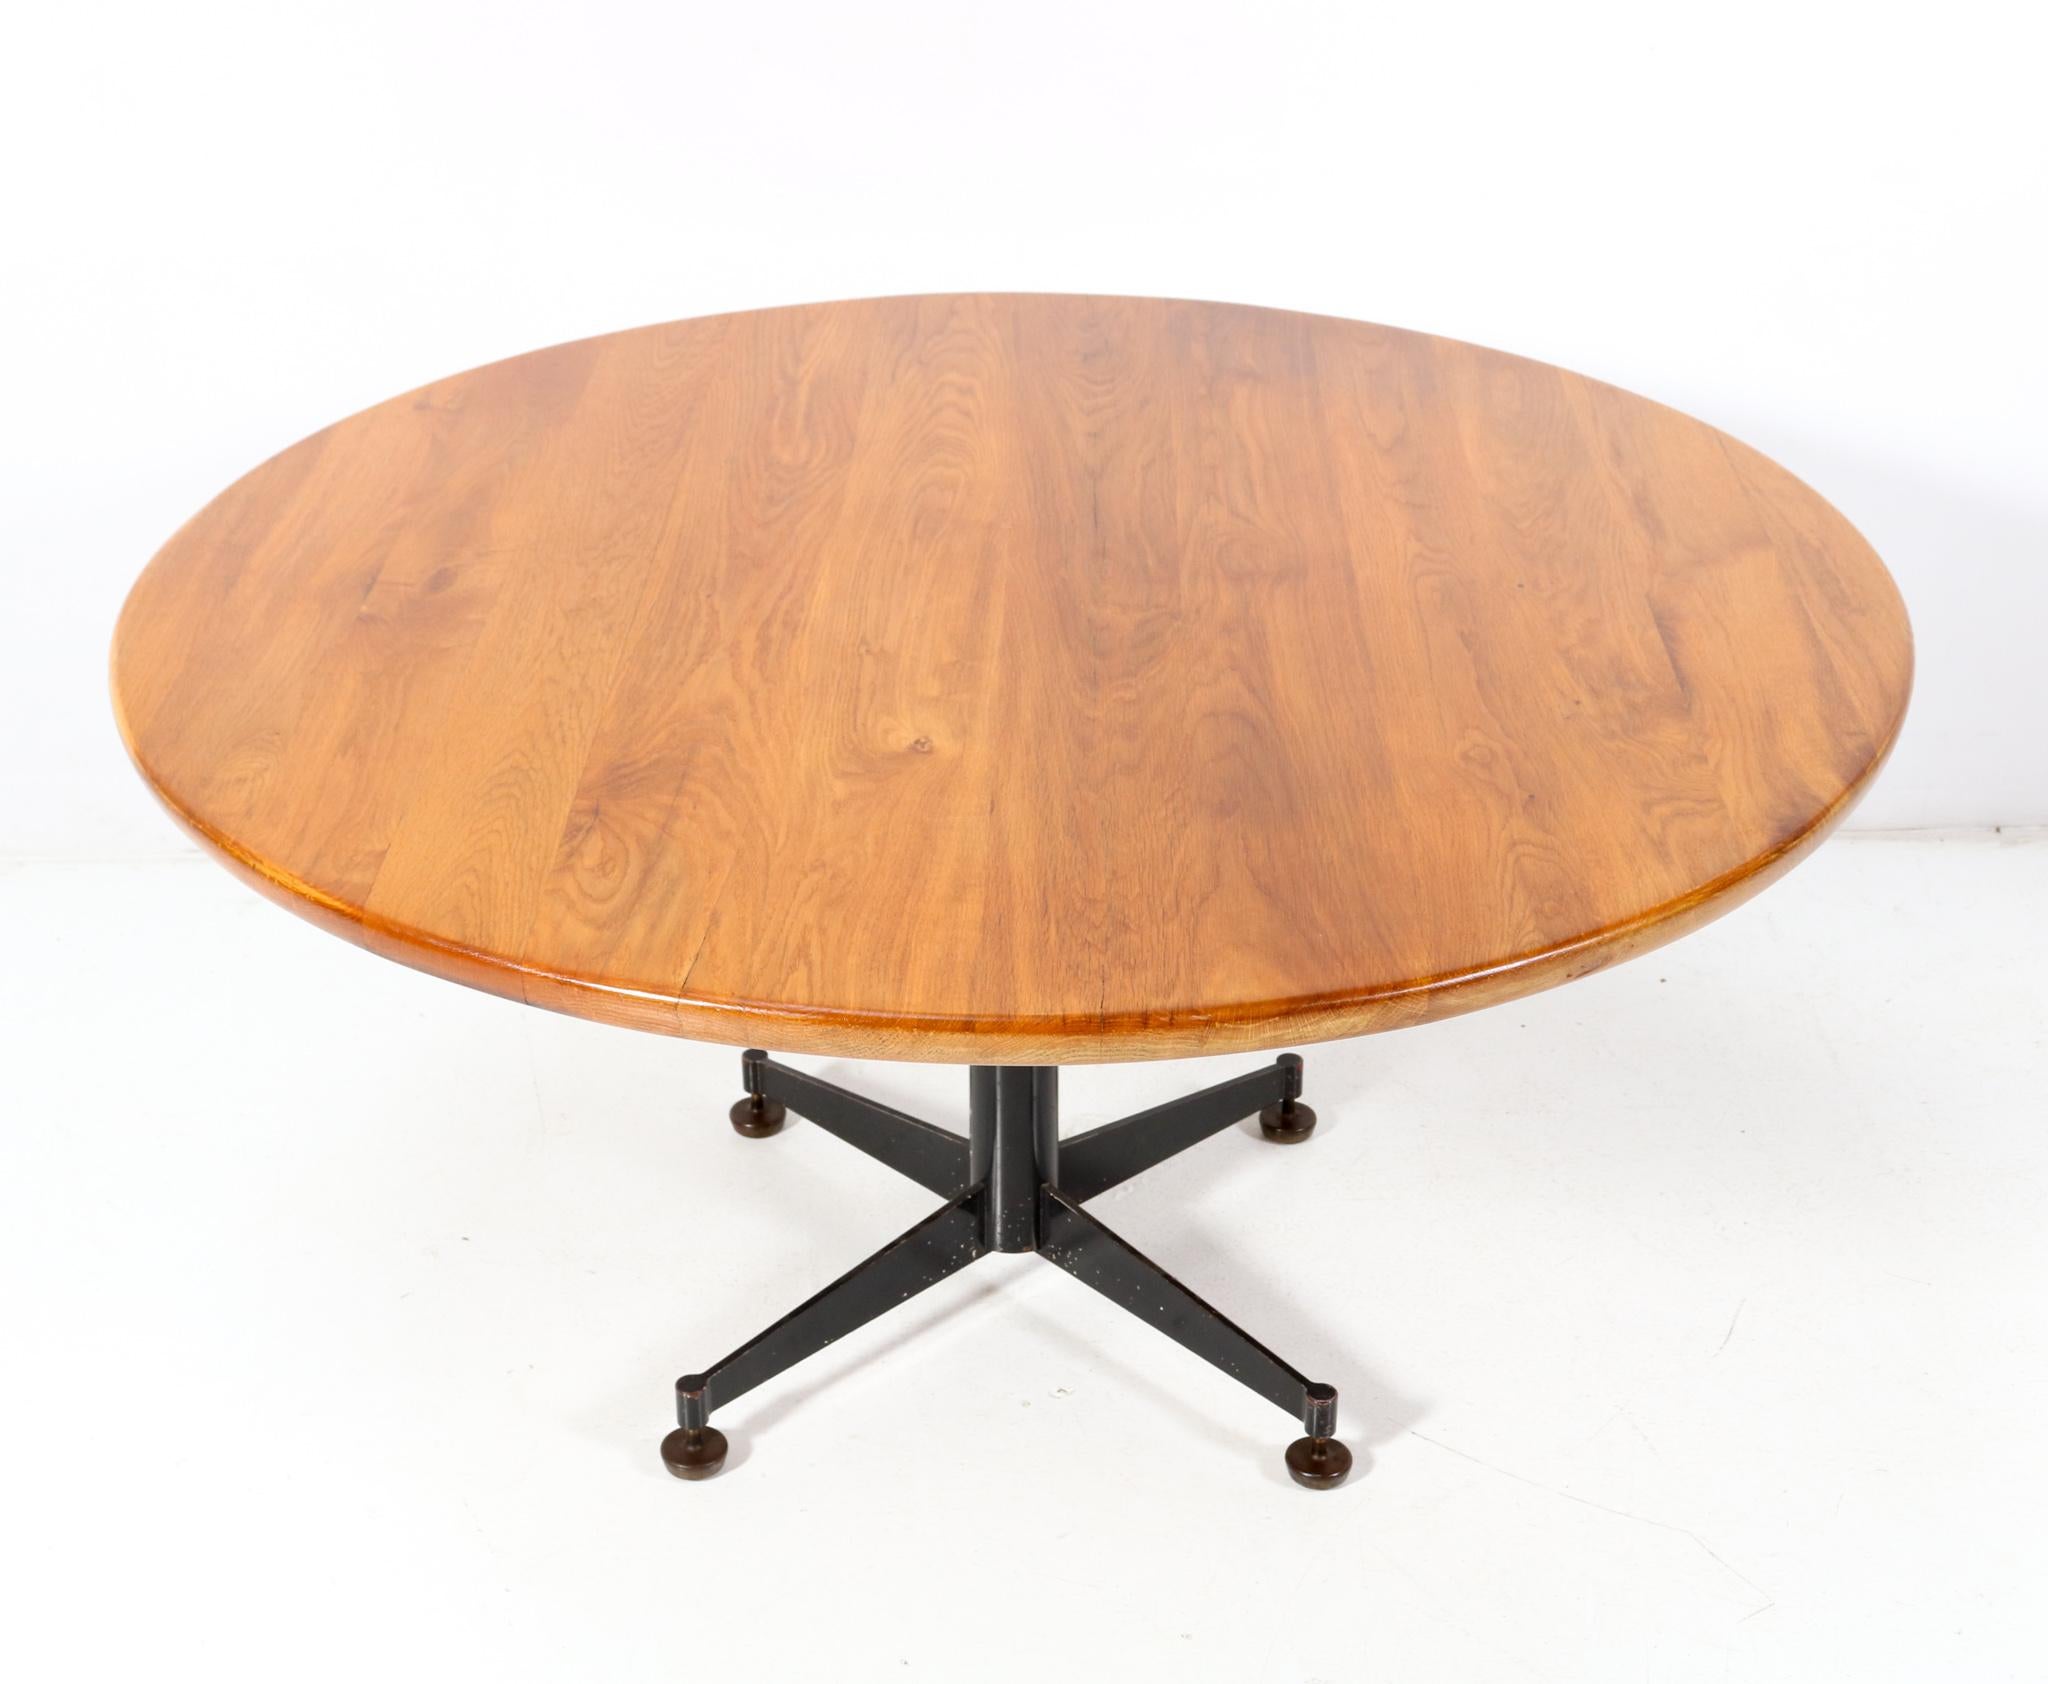 Magnificent and one of a kind Mid-Century Modern round dining room table.
Design by Architect Bart van Kasteel.
Striking Dutch design from the 1960s.
Original grey lacquered steel base with original round solid oak table top.
Comes with the original